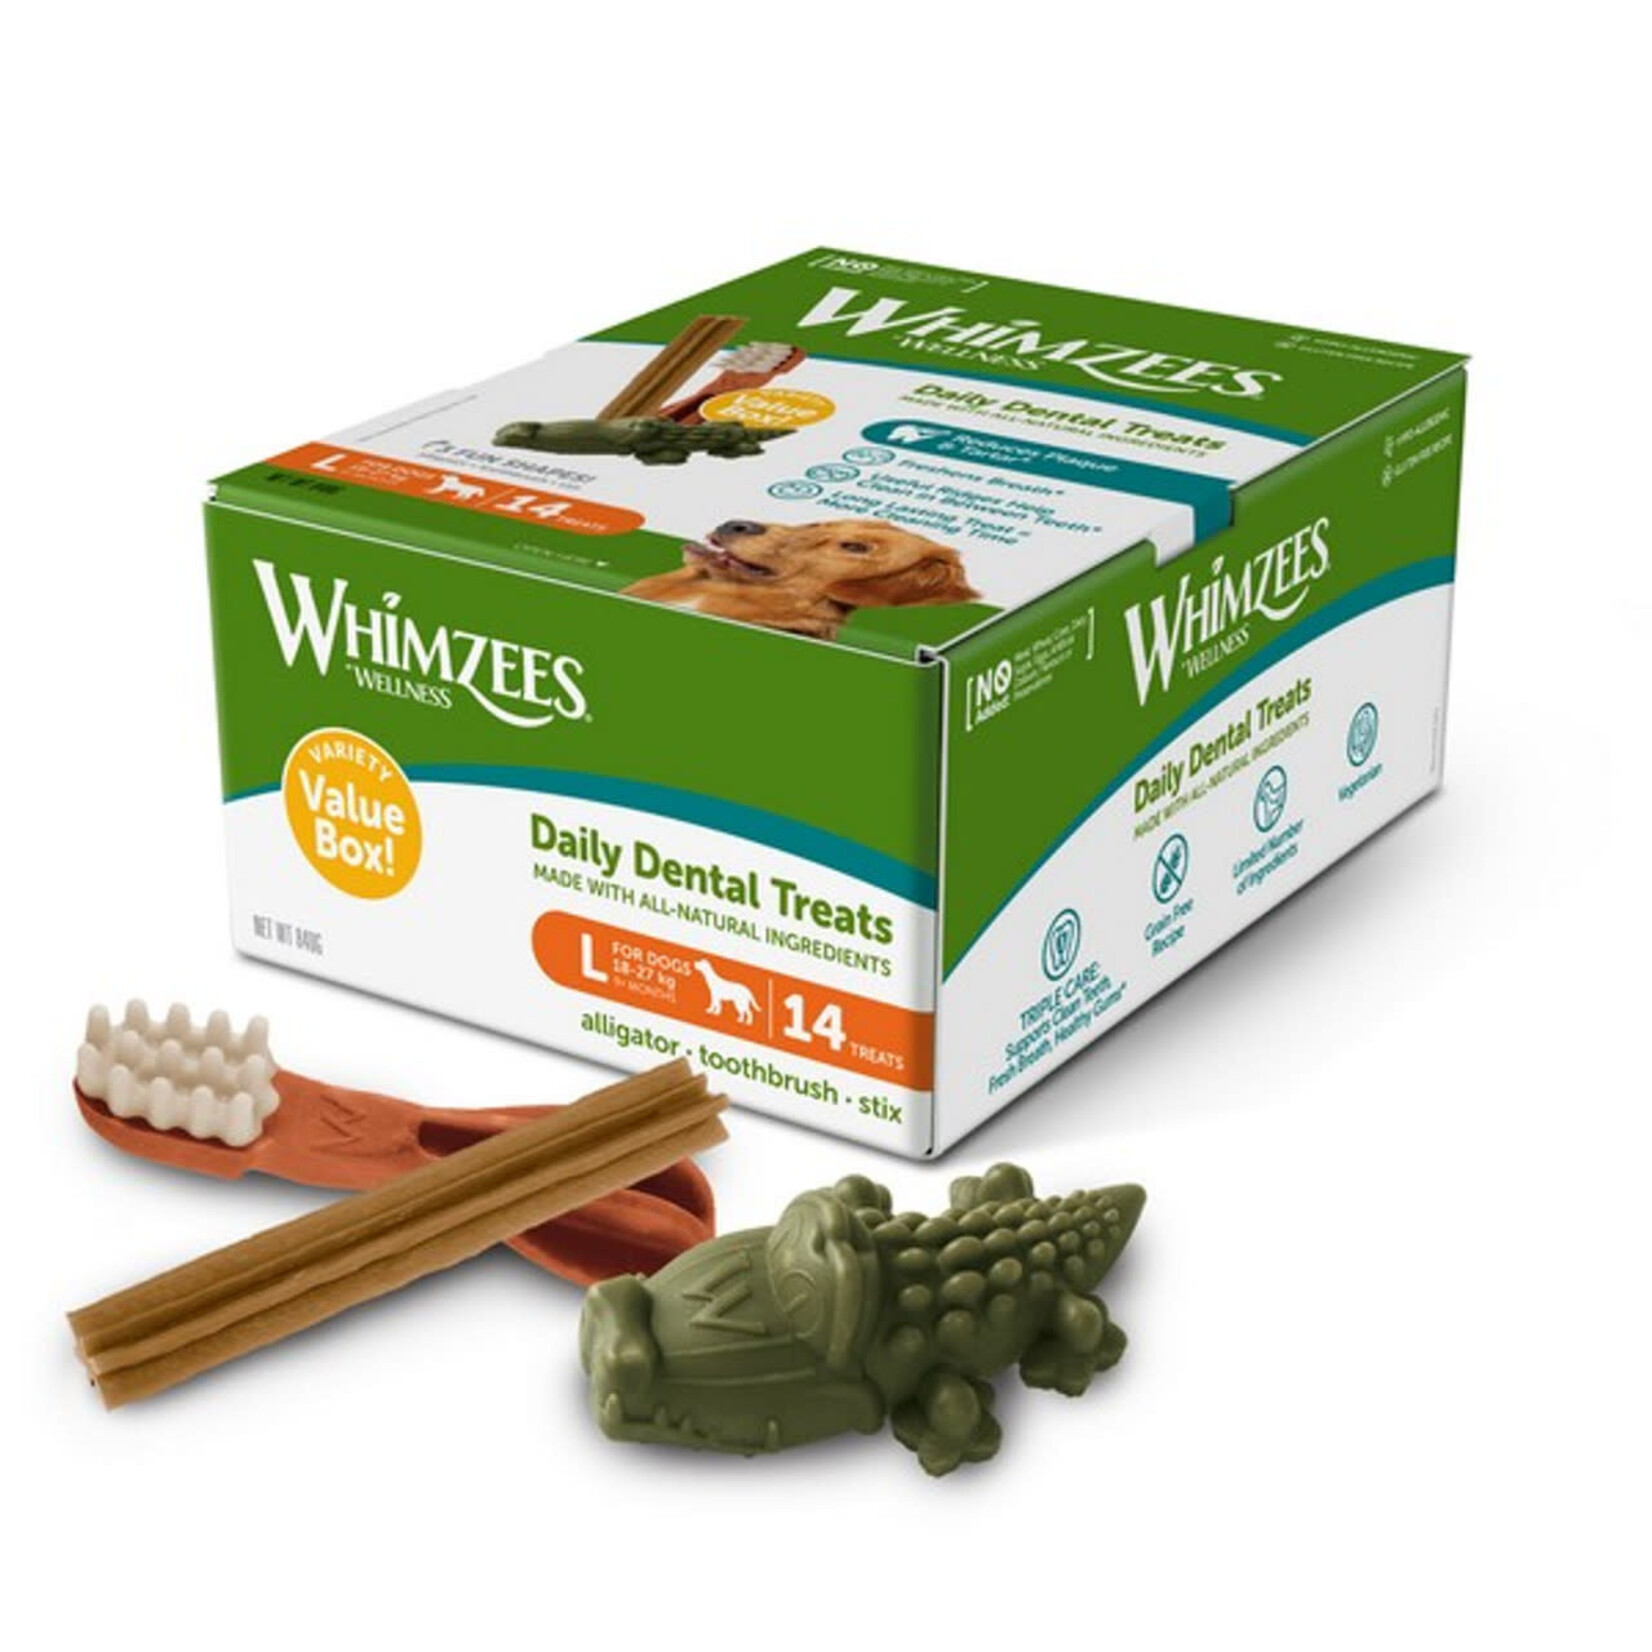 Whimzees Variety Value Box Natural Daily Dental Dog Chew Treats for Large Dogs, 14 pack